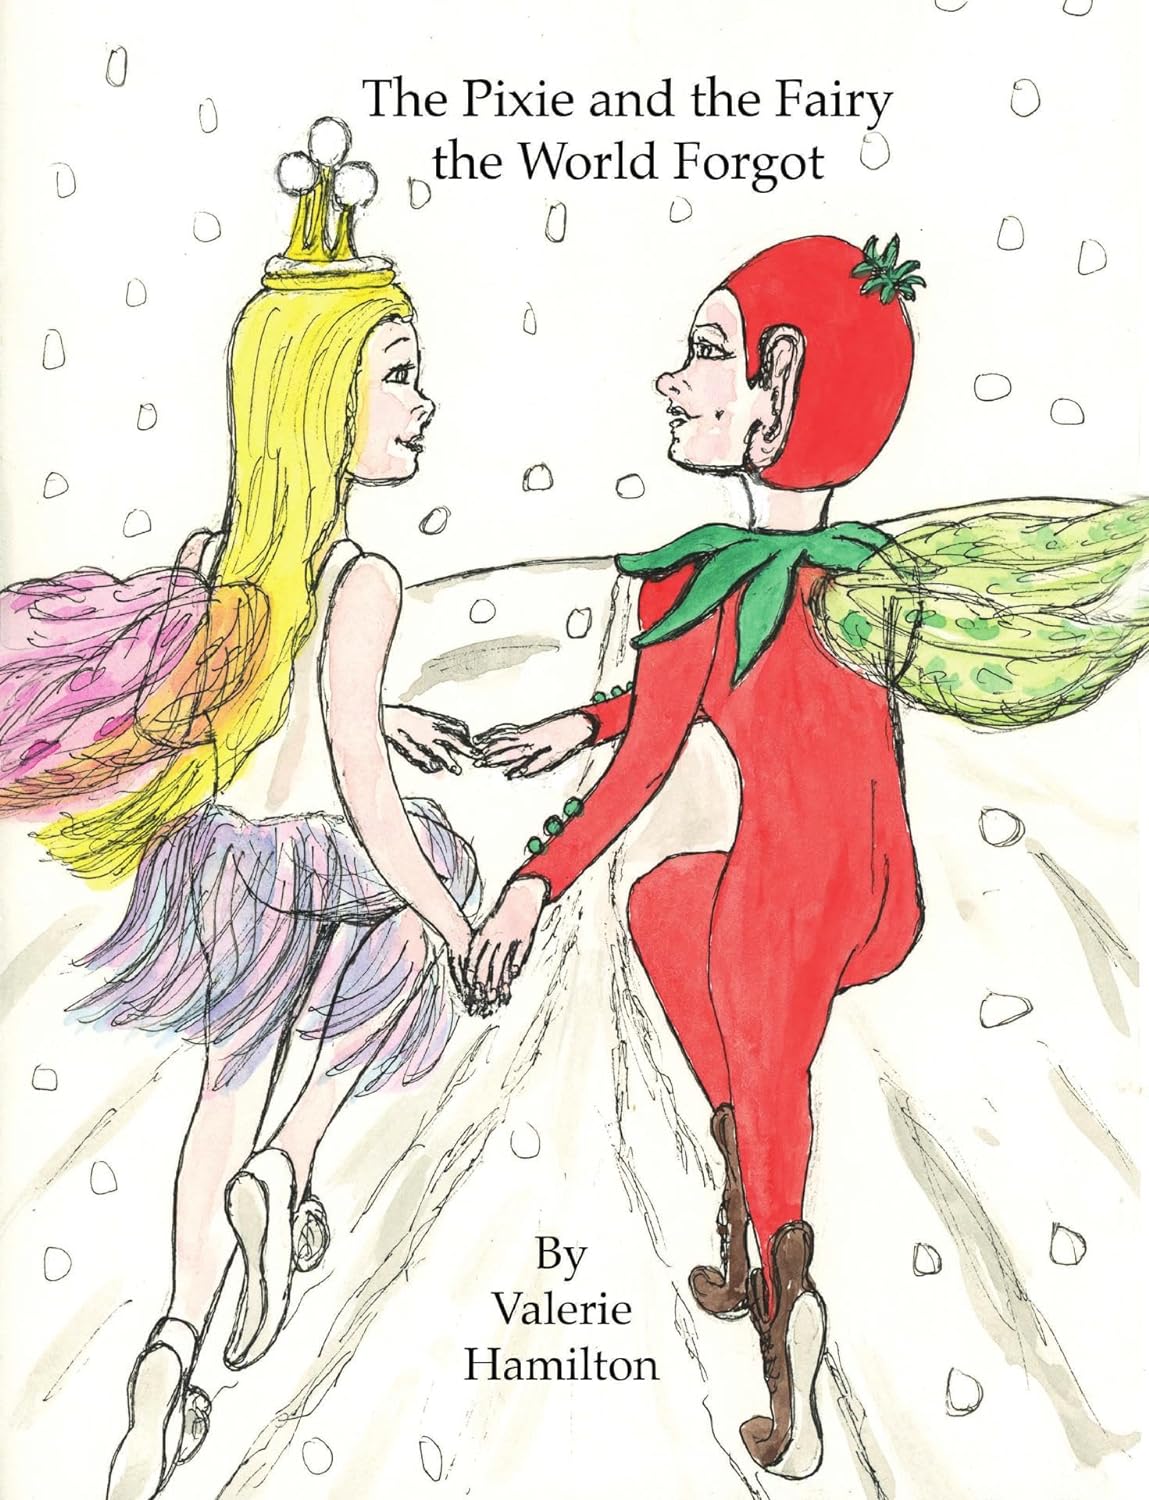 The Pixie and the Fairy the World Forgot